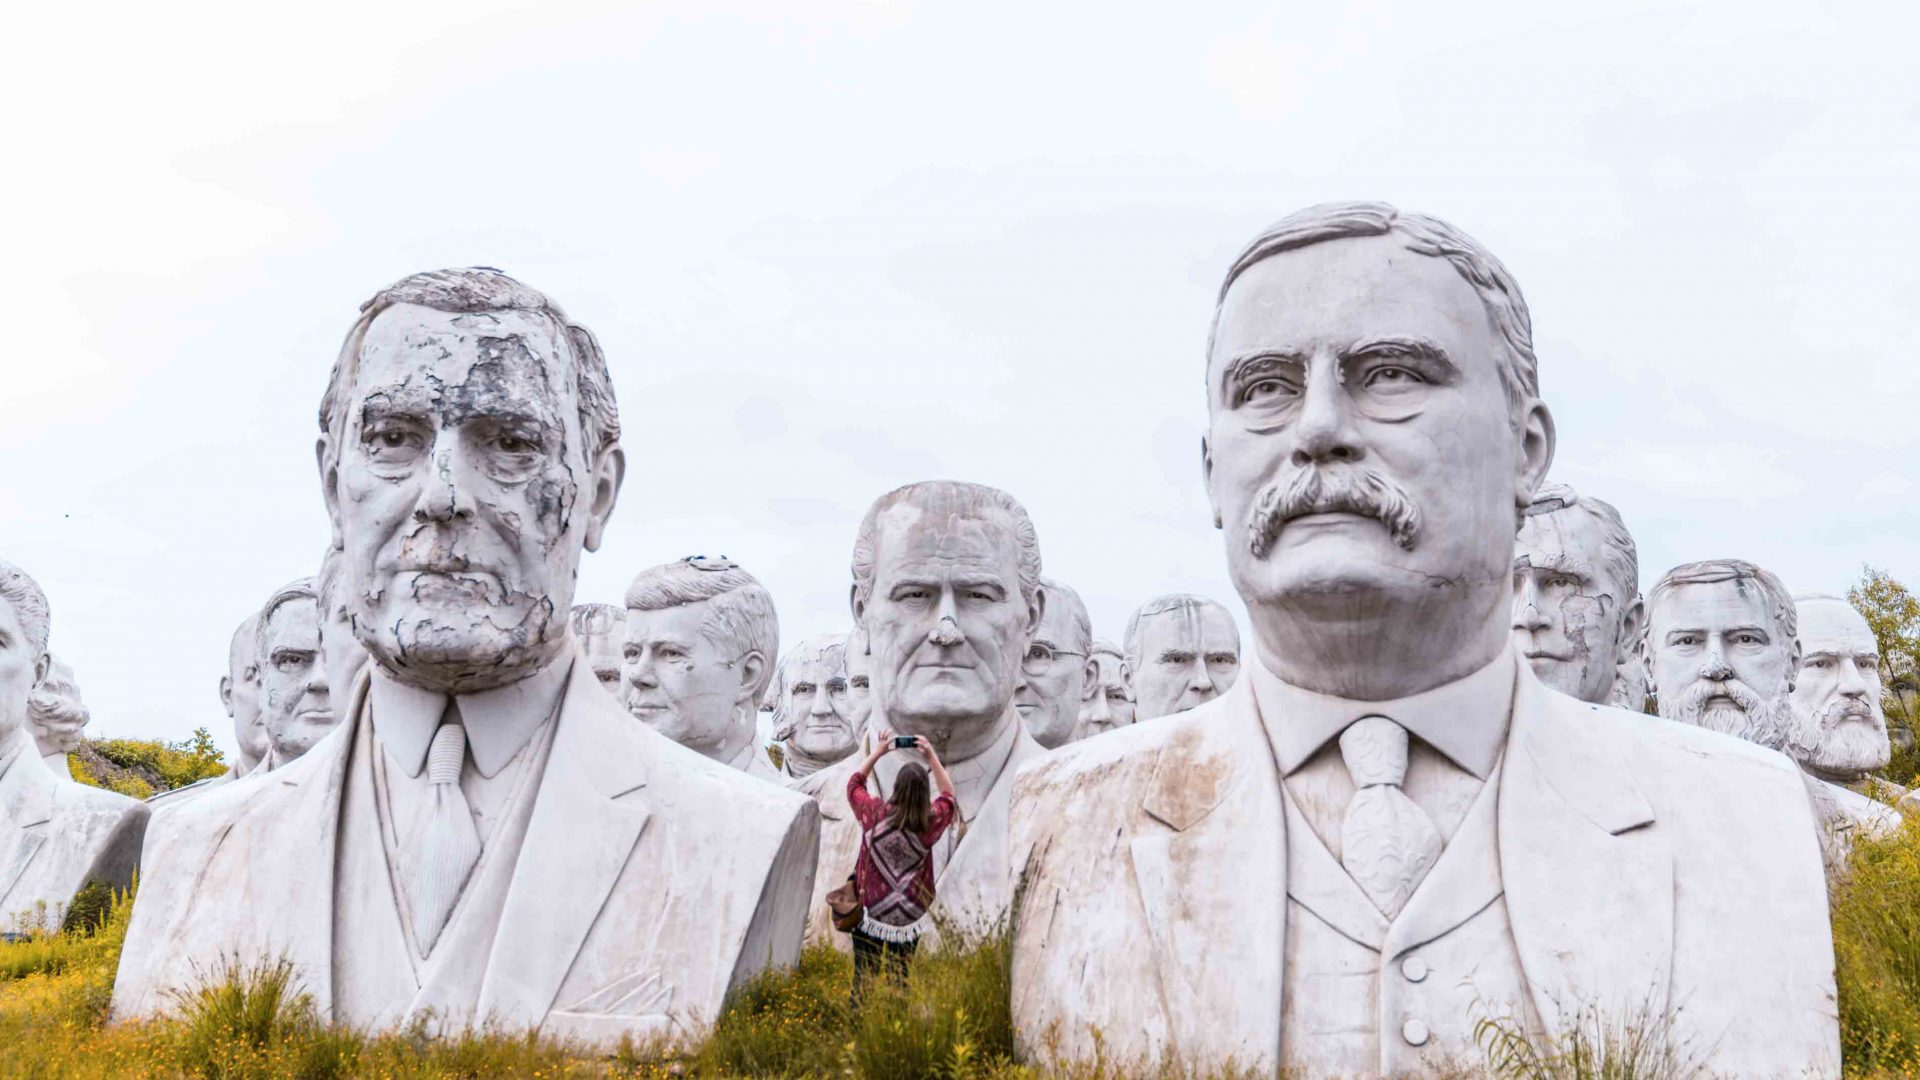 A woman can be seen taking photos of the busts or former US presidents which occupy the land of Croaker farmer Howard Hankins in rural Virginia.